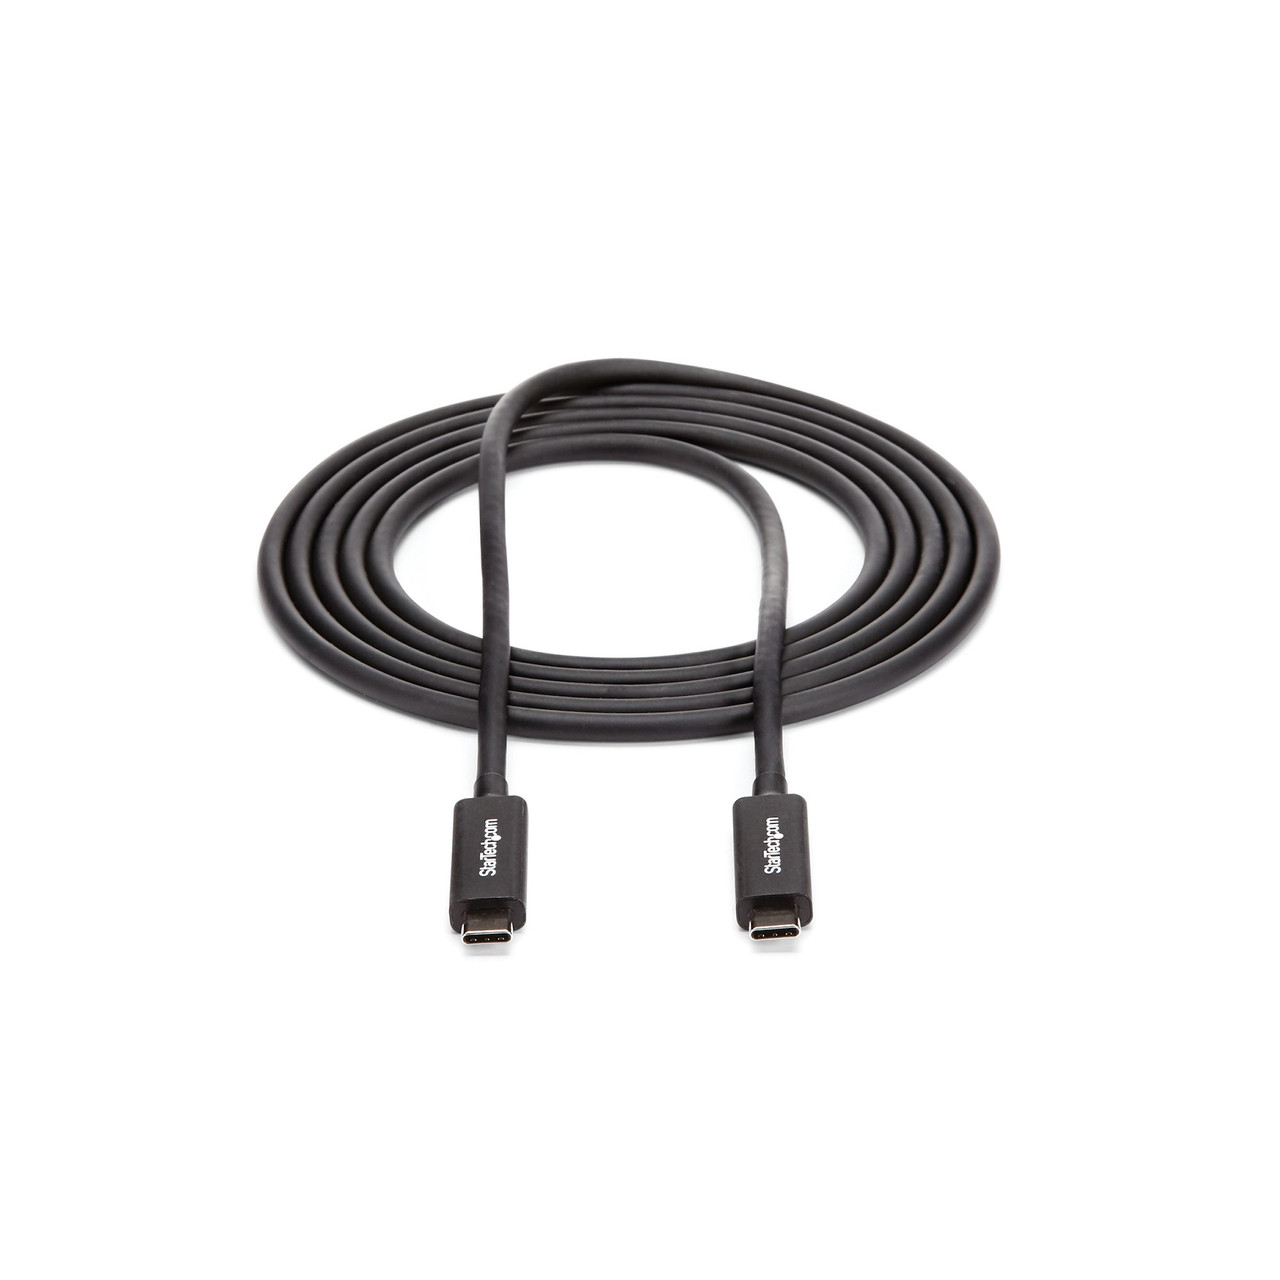 Thunderbolt 3 Cable 2m 20Gbps - Thunderbolt 3 Cables and Adapters